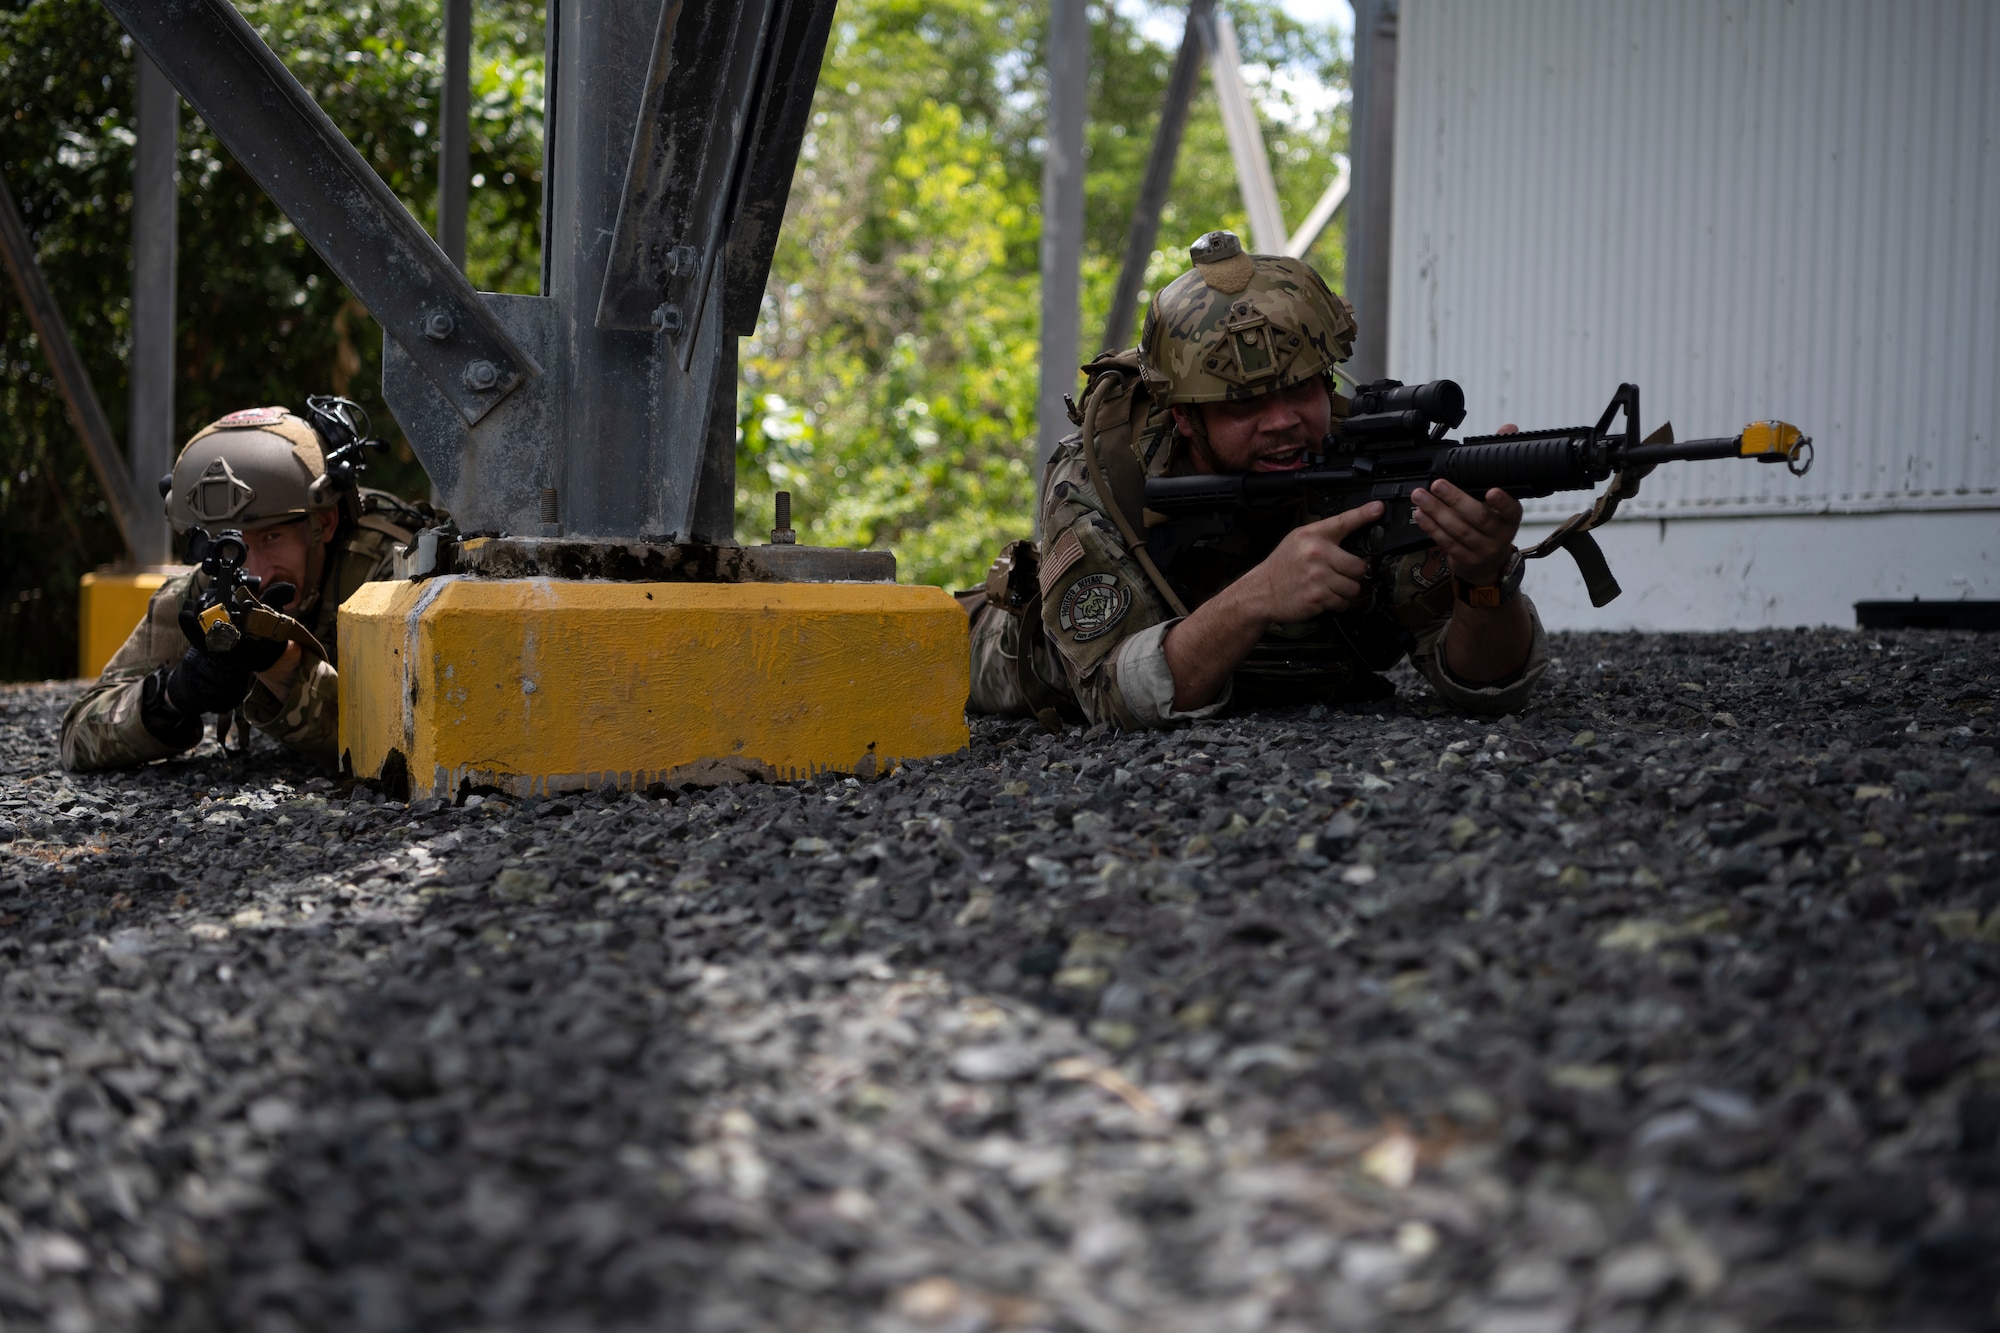 From left, U.S. Air Force Senior Airman Tyler McCauley, a security forces journeyman with the 123rd Contingency Response Group, Kentucky Air National Guard, and Senior Airman Kevin Medina, a security forces journeyman with the 156th Security Operations Squadron, Puerto Rico Air National Guard, engage opposing forces during air base ground defense training at Muñiz Air National Guard Base in Carolina, Puerto Rico, Sept. 21, 2023. During the training, Airmen reinforced air base ground defense skills utilized during contingency response operations in contested environments by practicing radio communications, warning and operation orders, vehicle searches, vehicle take-downs, close-quarter battle, and small team tactics. (U.S. Air National Guard photo by Master Sgt. Rafael D. Rosa)